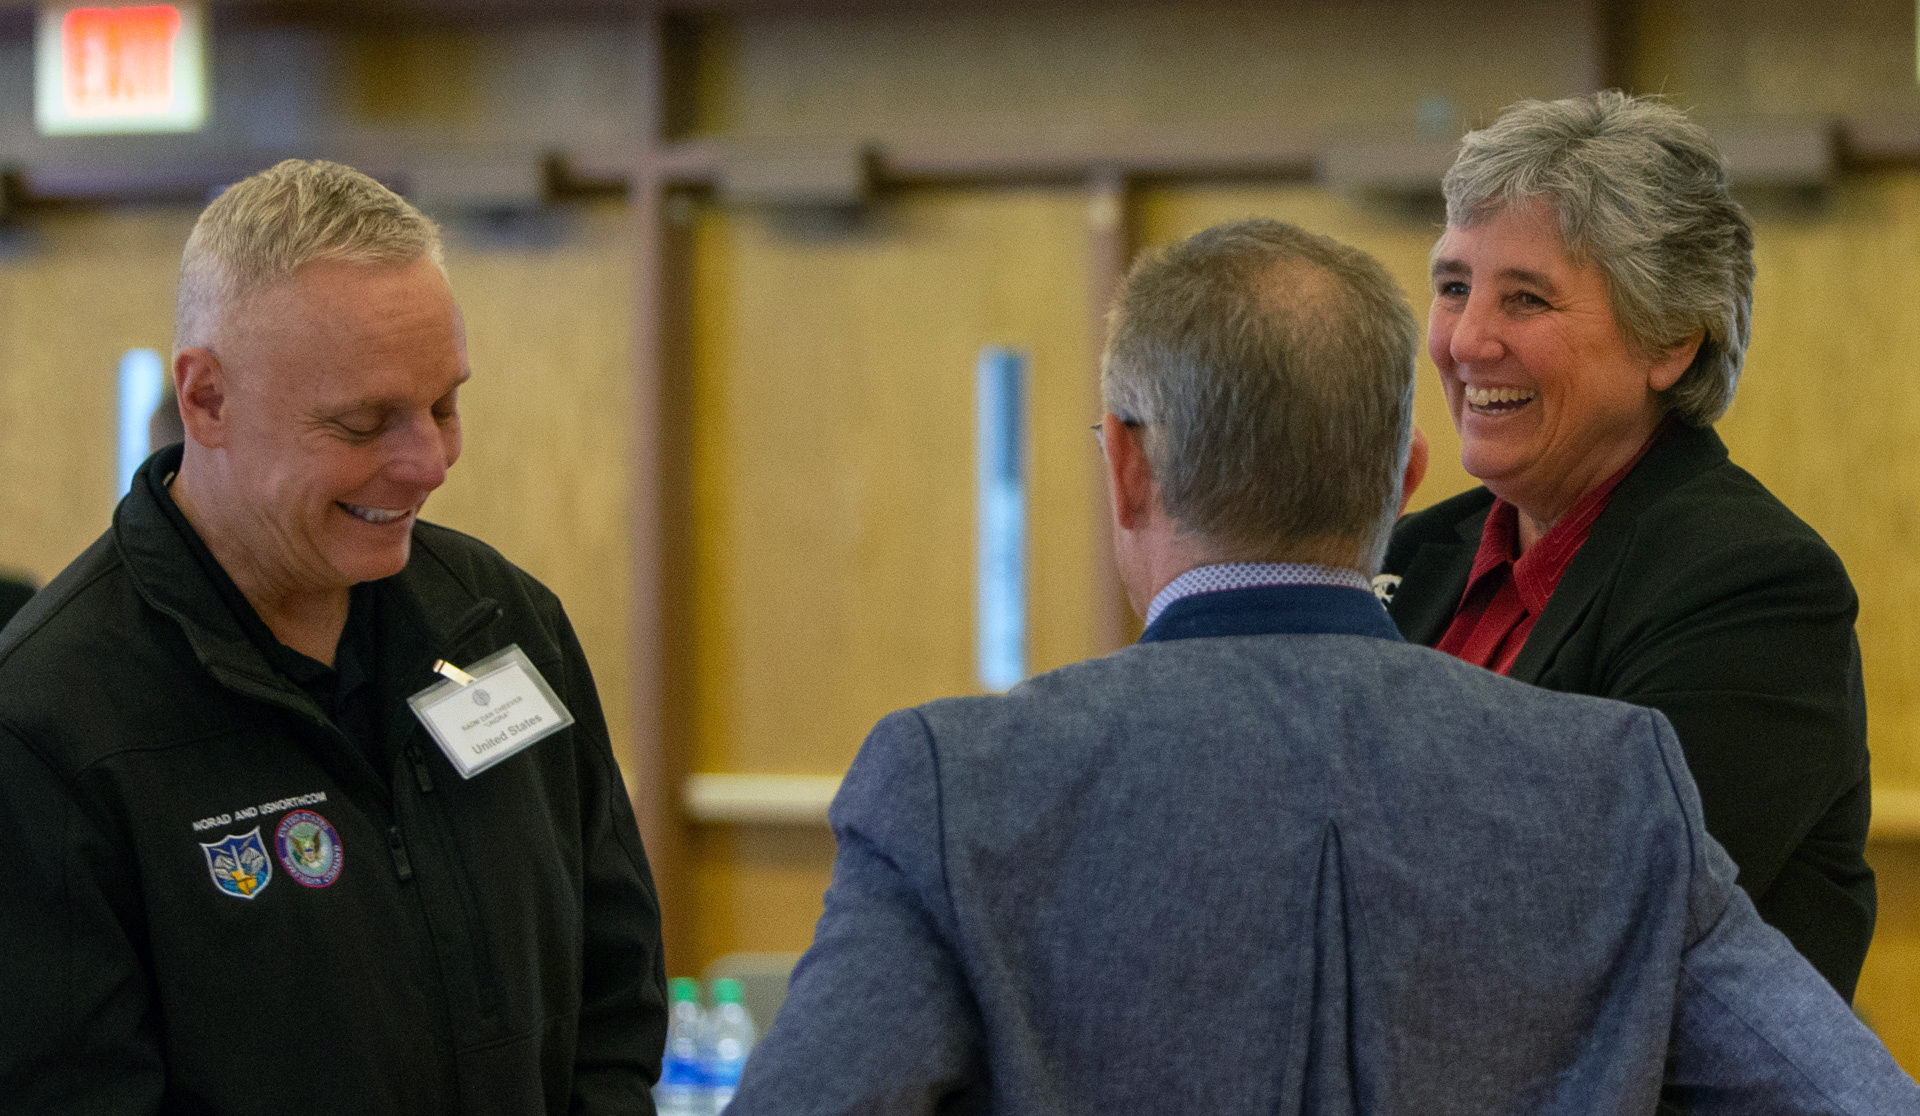 Rear Adm.Dan “Undra” Cheever, the U.S. Northern Command’s director of strategies, policies and plans, at left, talks with University of Alaska President Pitney, at right, and  Daniel Neuffer, the U.S. European Command’s Arctic strategist.